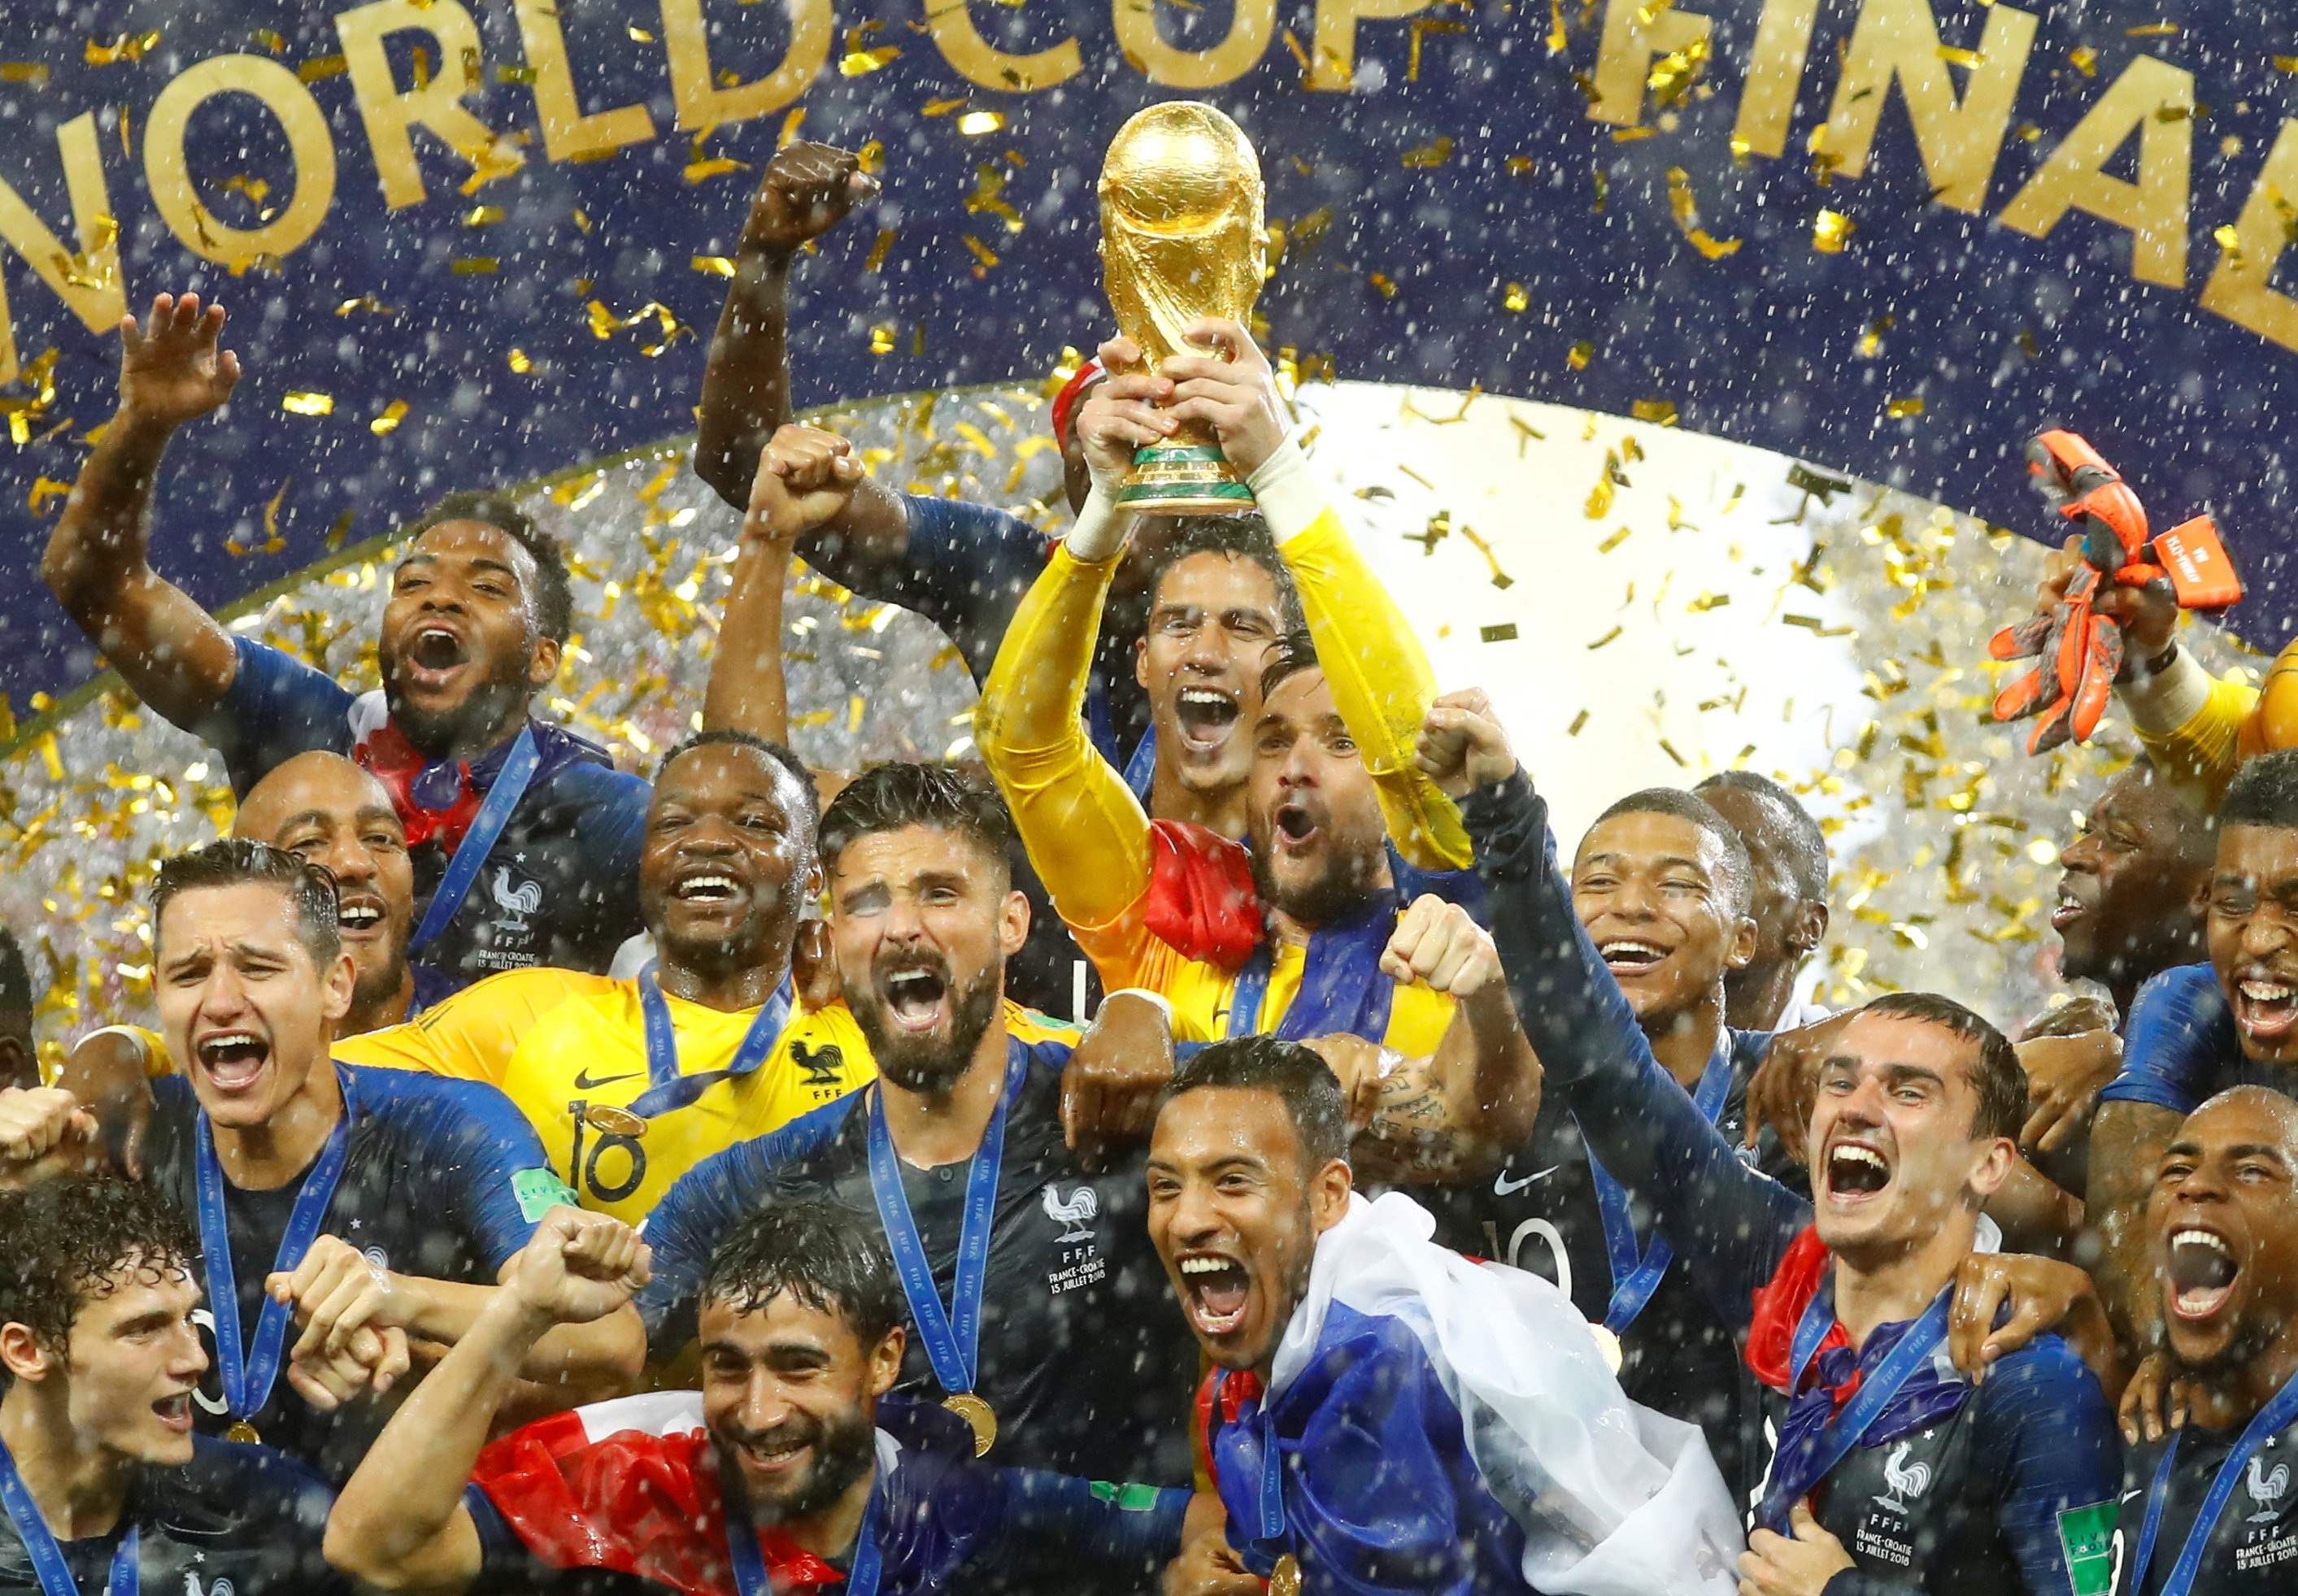 Chart: How Much Prize Money Do World Cup Champions Win?